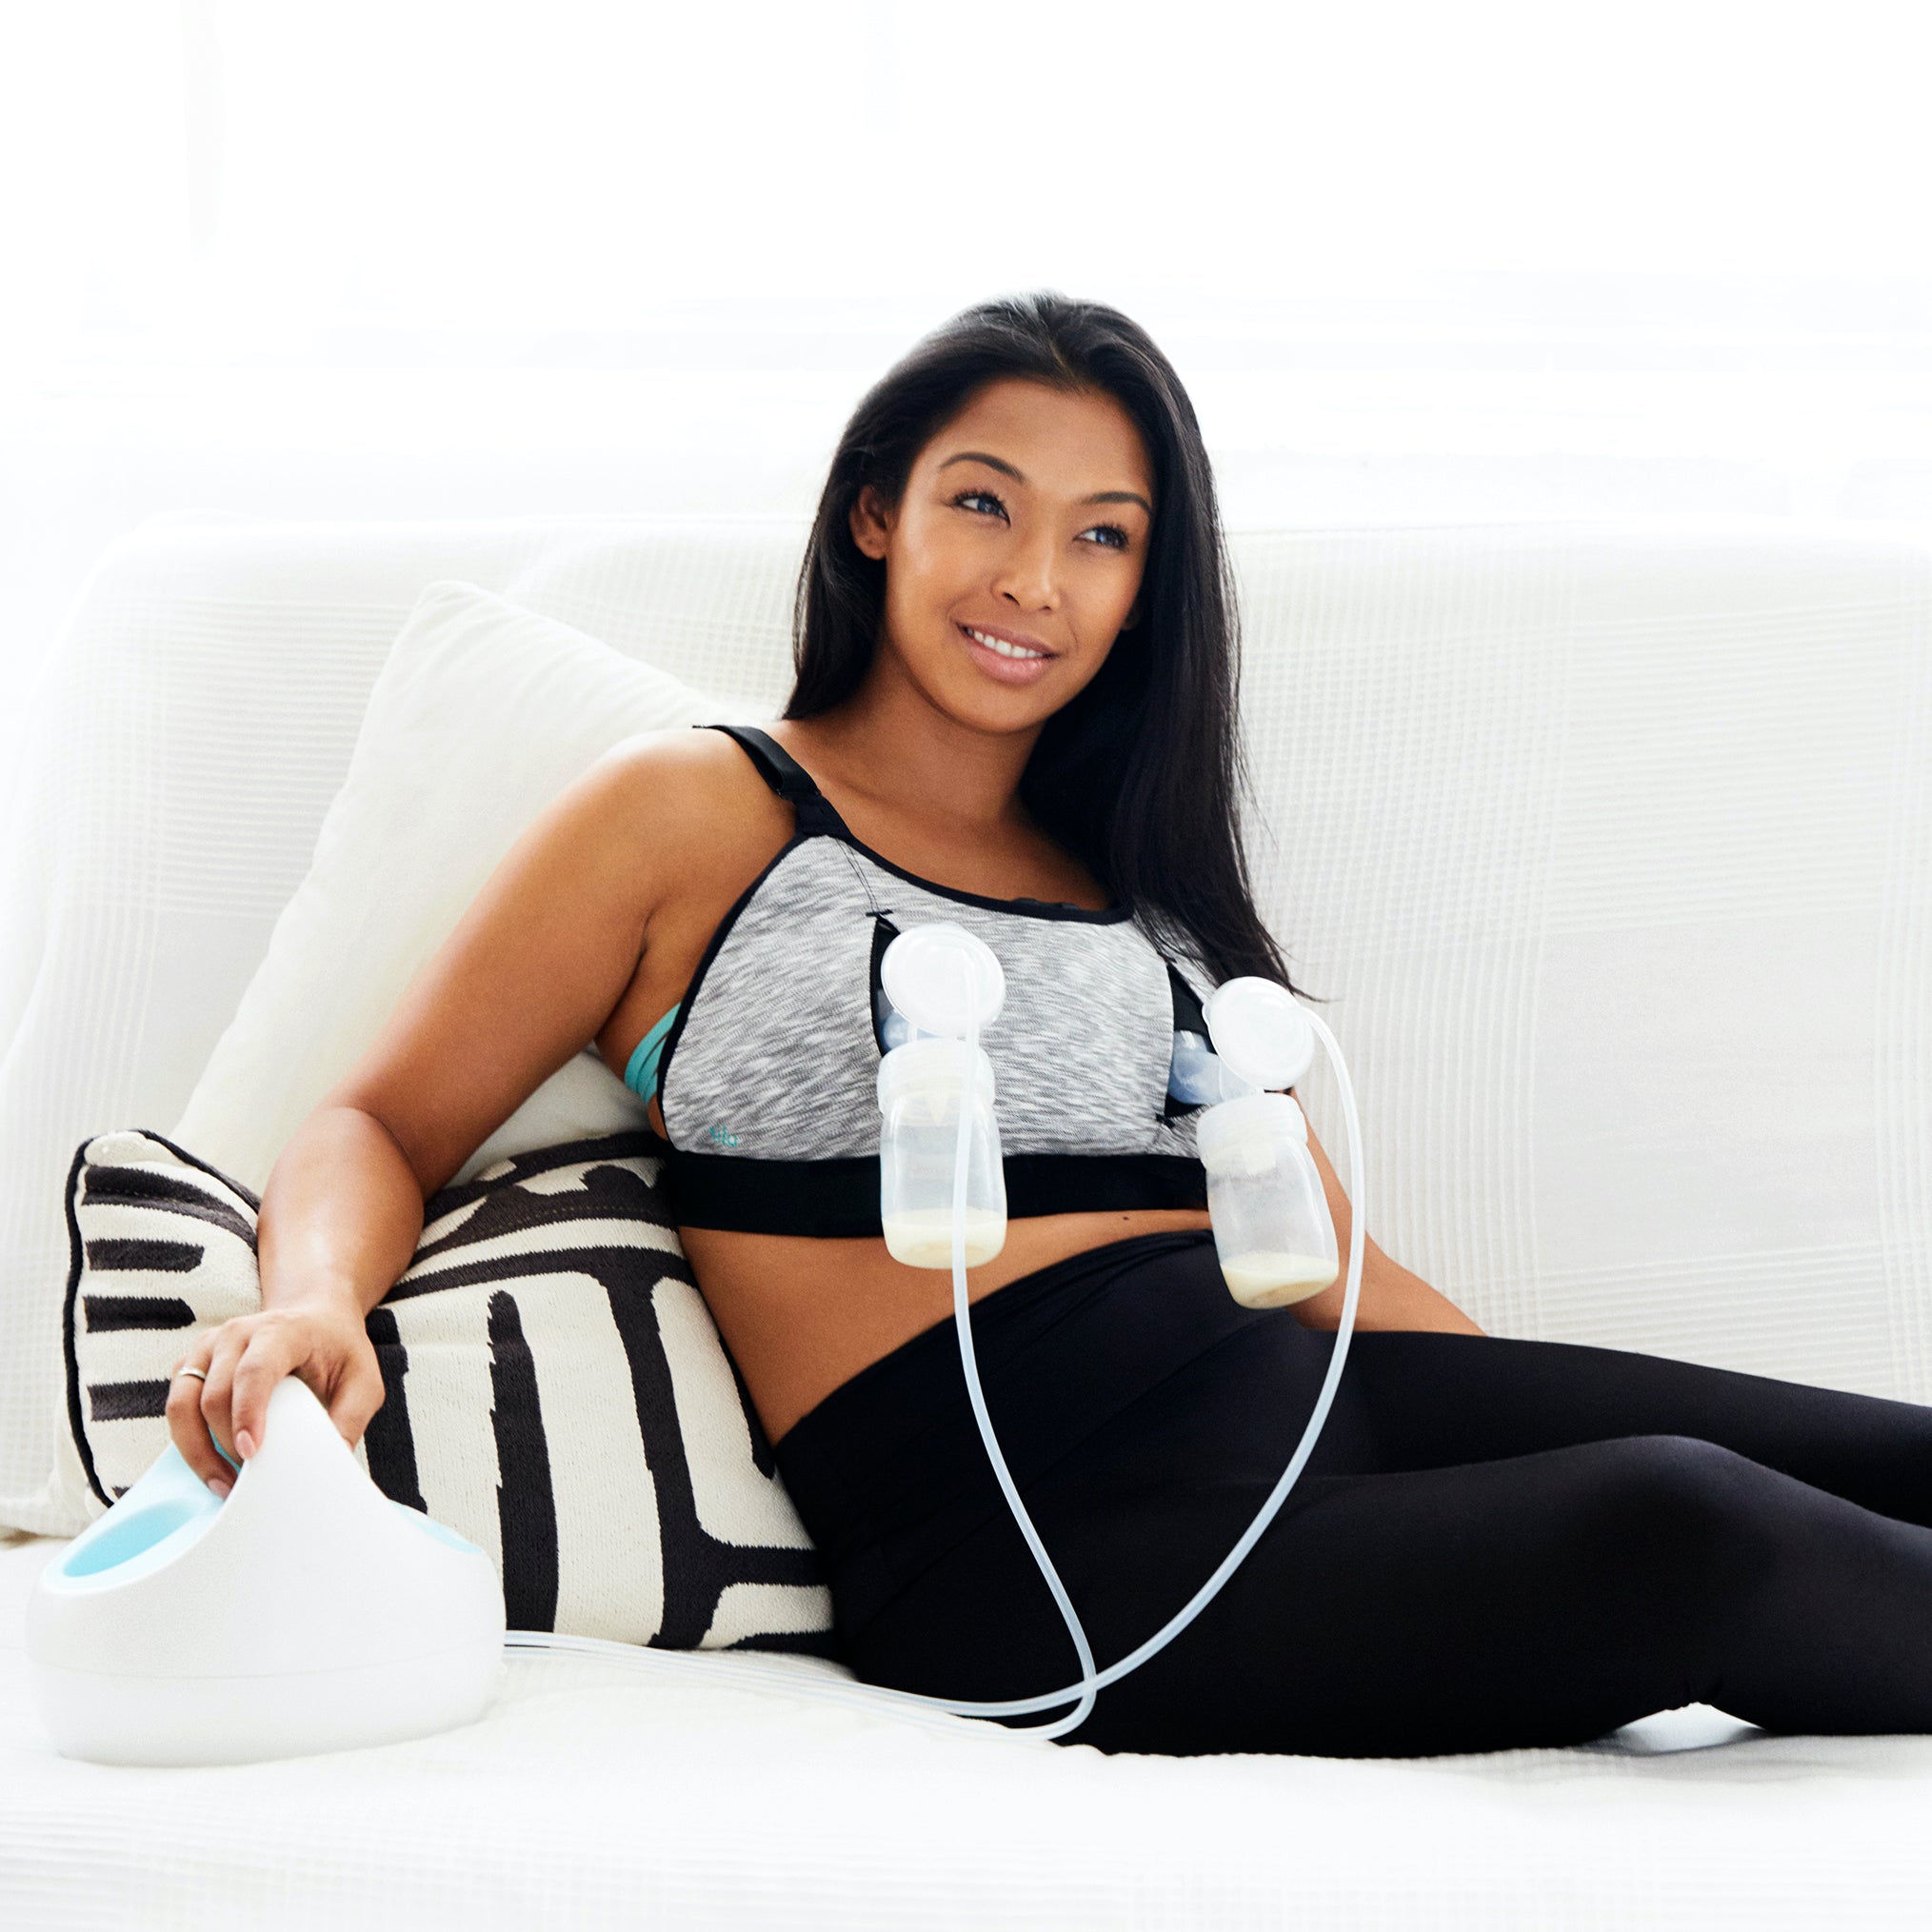 How to Choose the Best Breast Pump for Your Needs